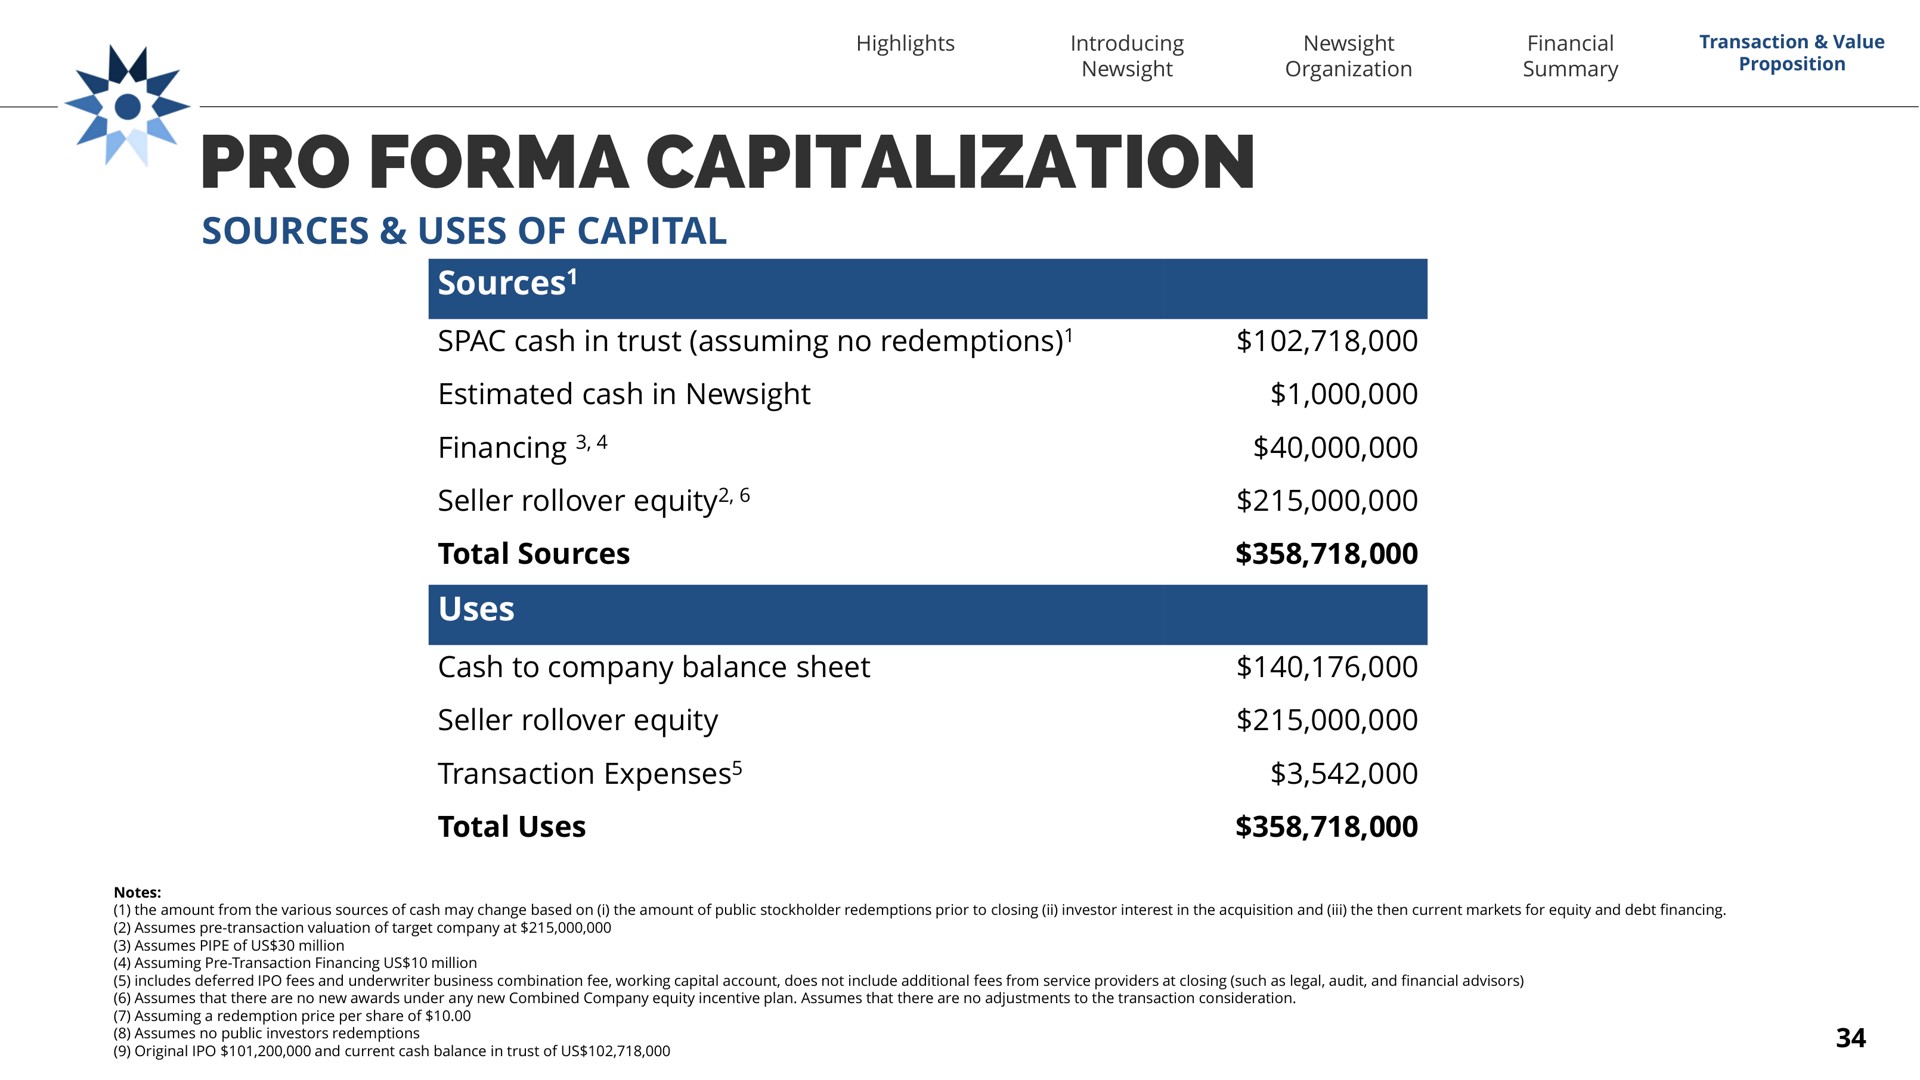 pro capitalization sources uses of capital sources cash in trust assuming no redemptions estimated cash in financing seller equity total sources uses cash to company balance sheet seller equity transaction expenses total uses expenses | Newsight Imaging